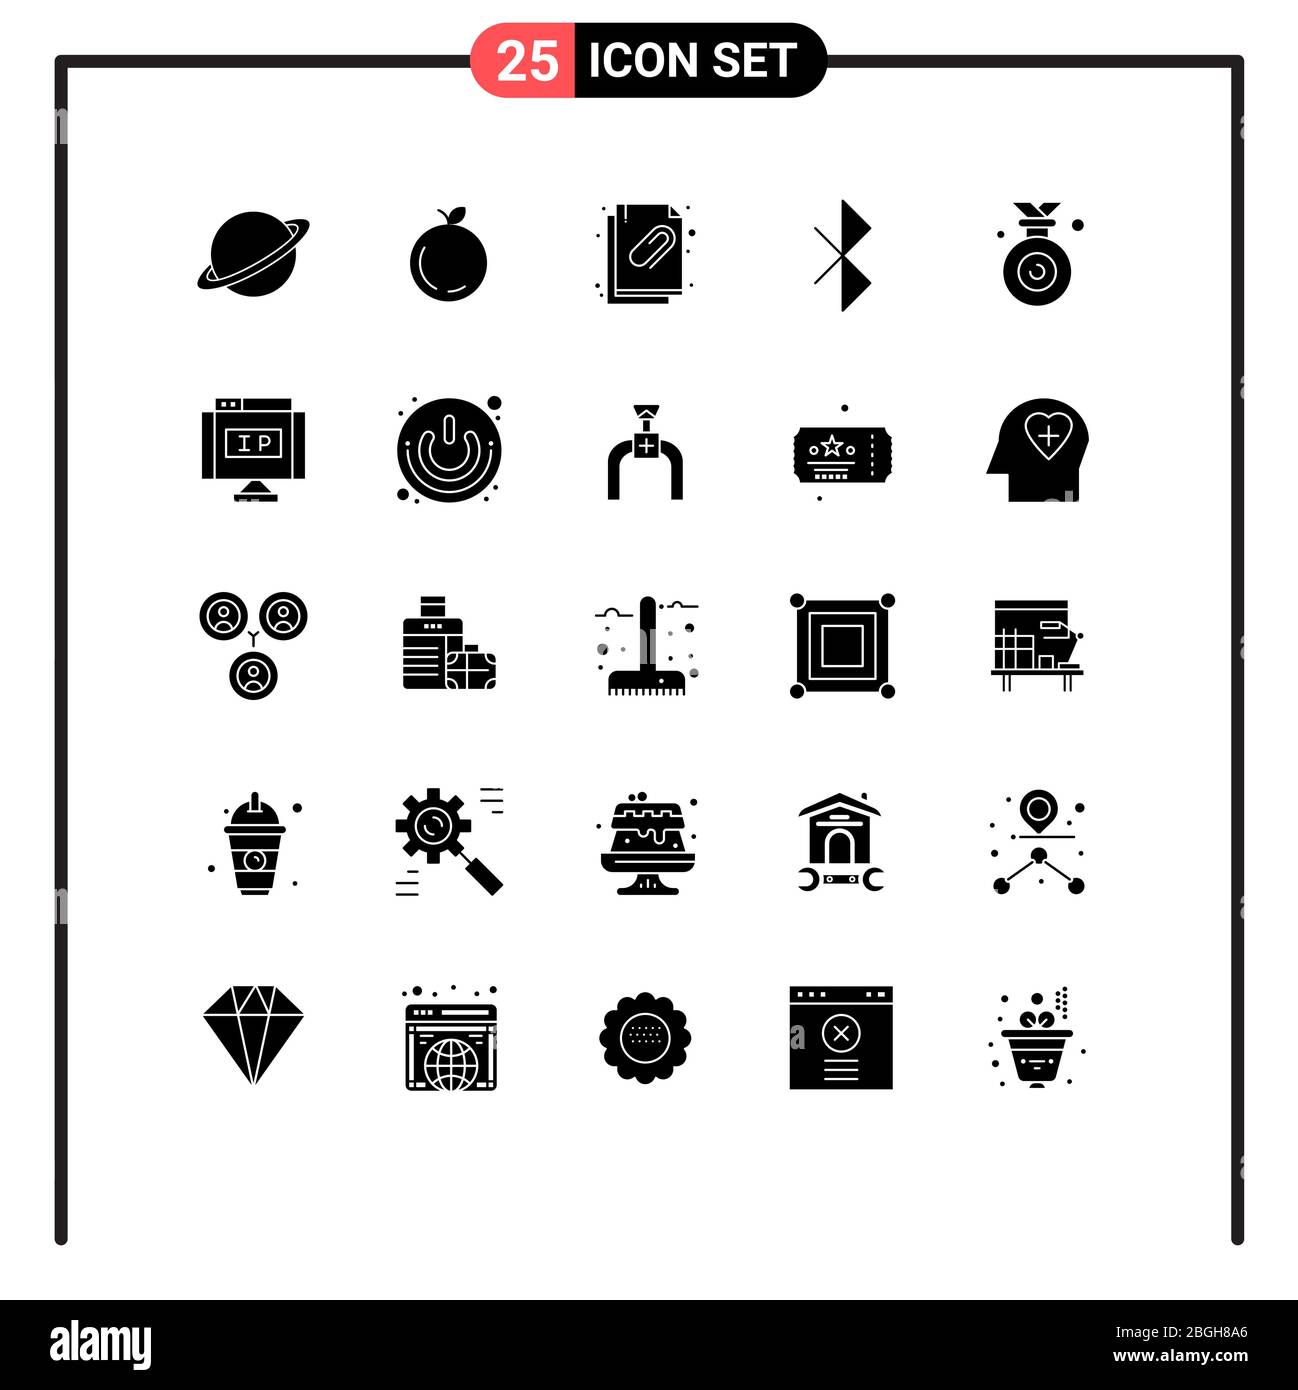 Set of 25 Vector Solid Glyphs on Grid for winner, medal, attached document, signal, bluetooth Editable Vector Design Elements Stock Vector